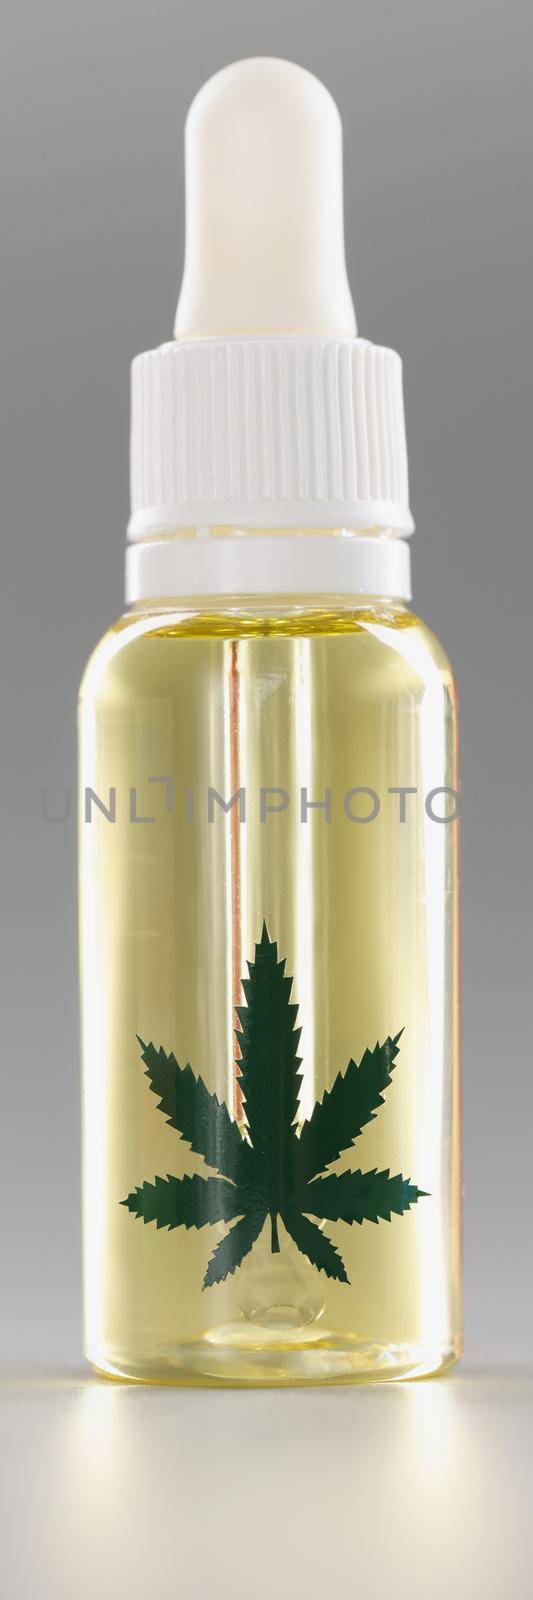 Bottle with liquid cannabis oil, healthy hemp plant for face or medication treatment by kuprevich